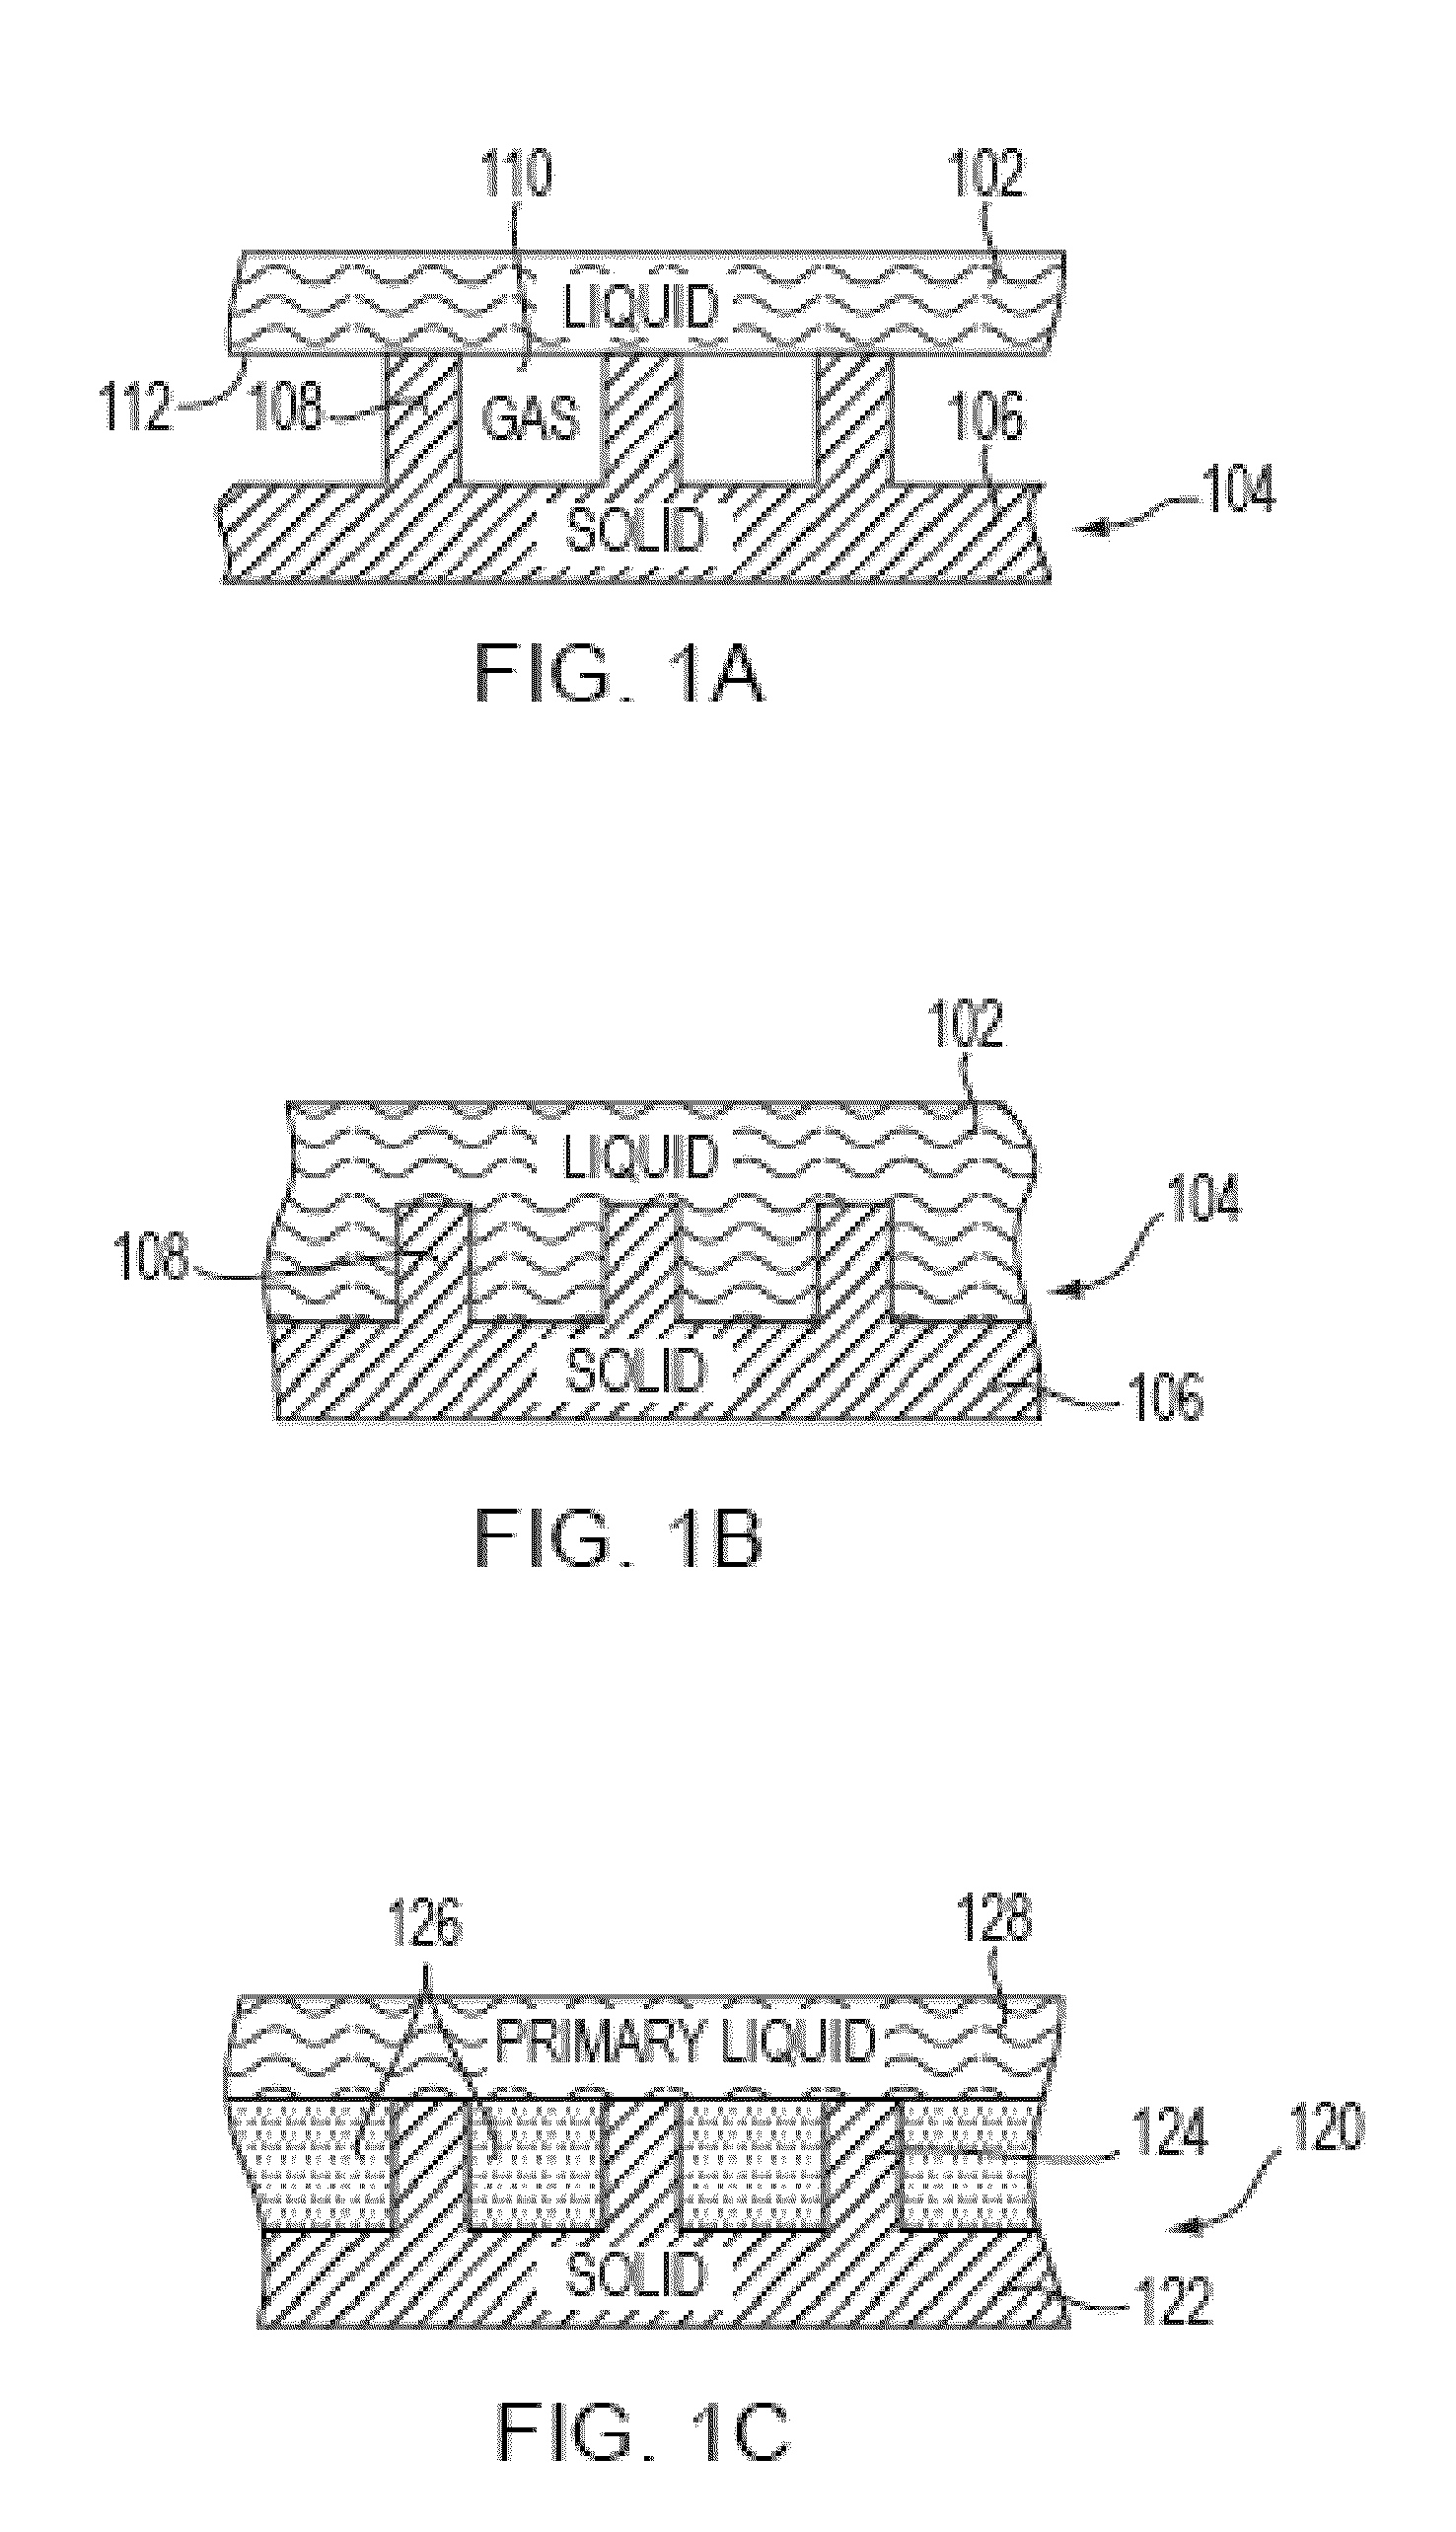 Self-lubricating surfaces for food packaging and food processing equipment